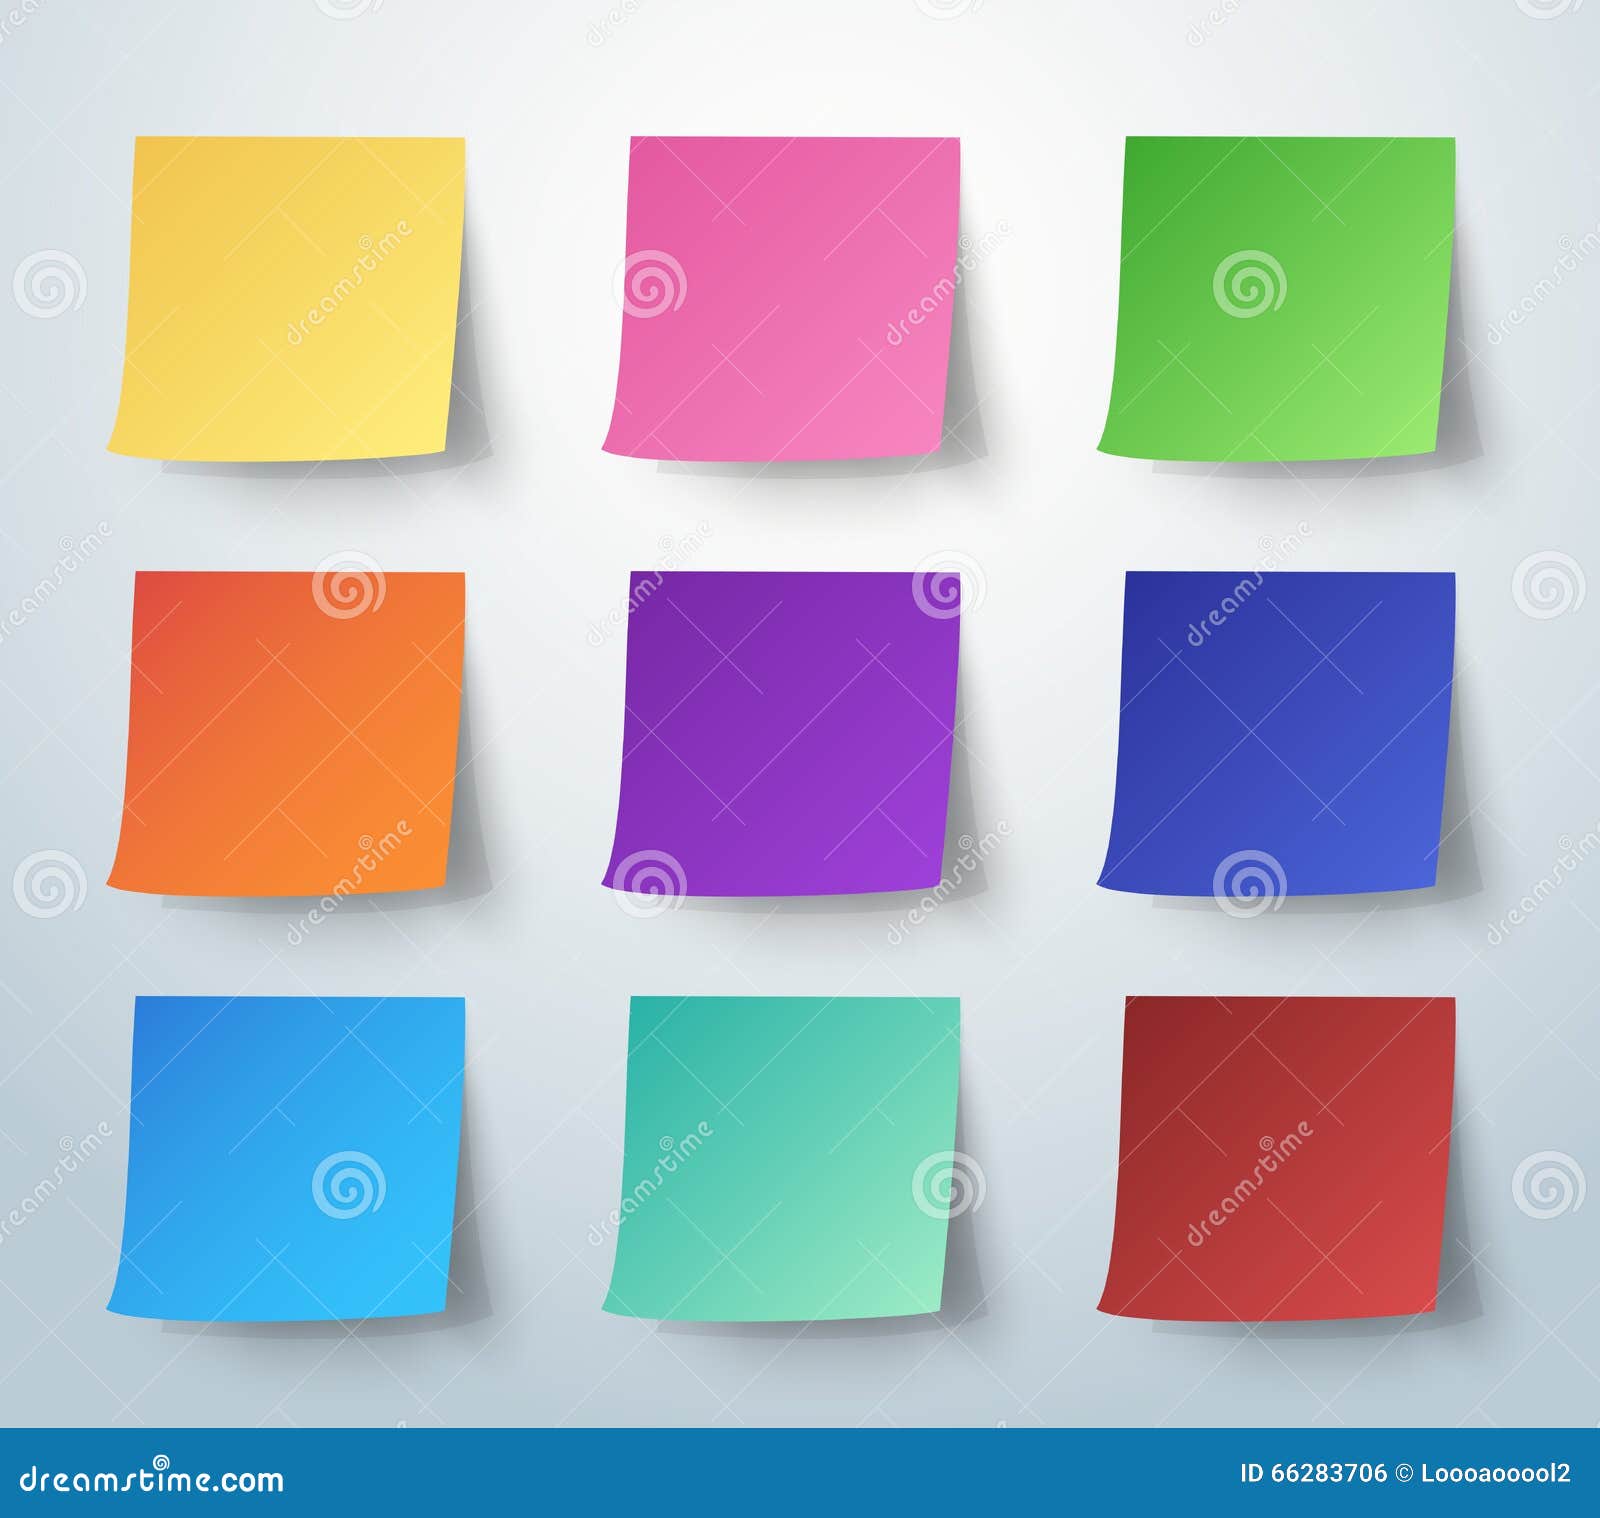 Process planning board with color sticky notes Vector Image